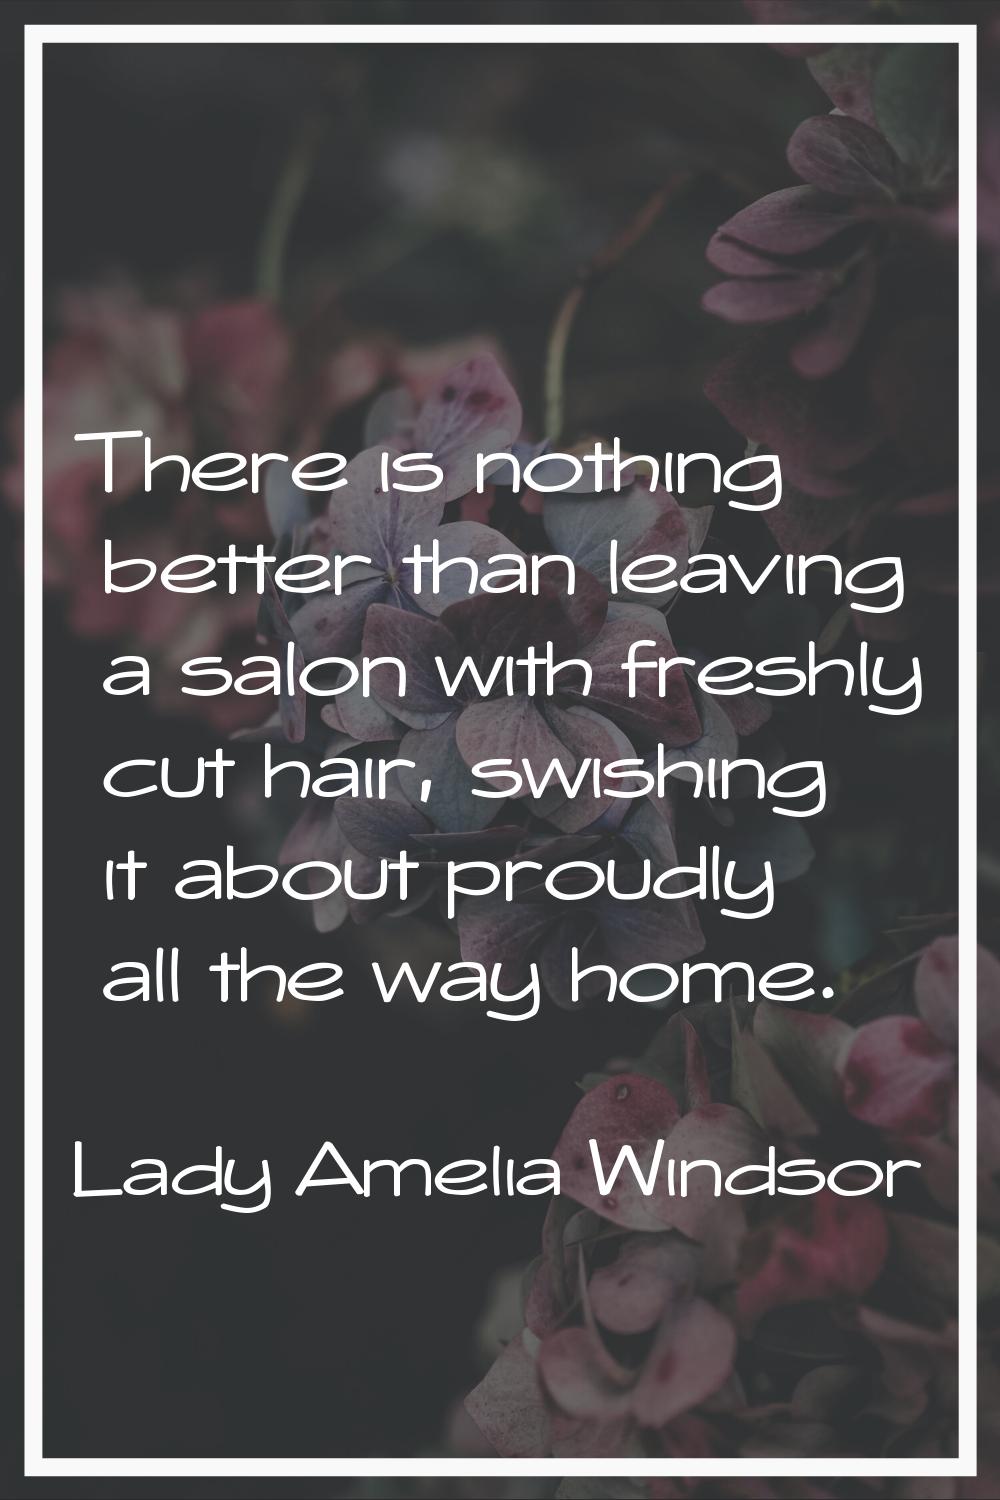 There is nothing better than leaving a salon with freshly cut hair, swishing it about proudly all t